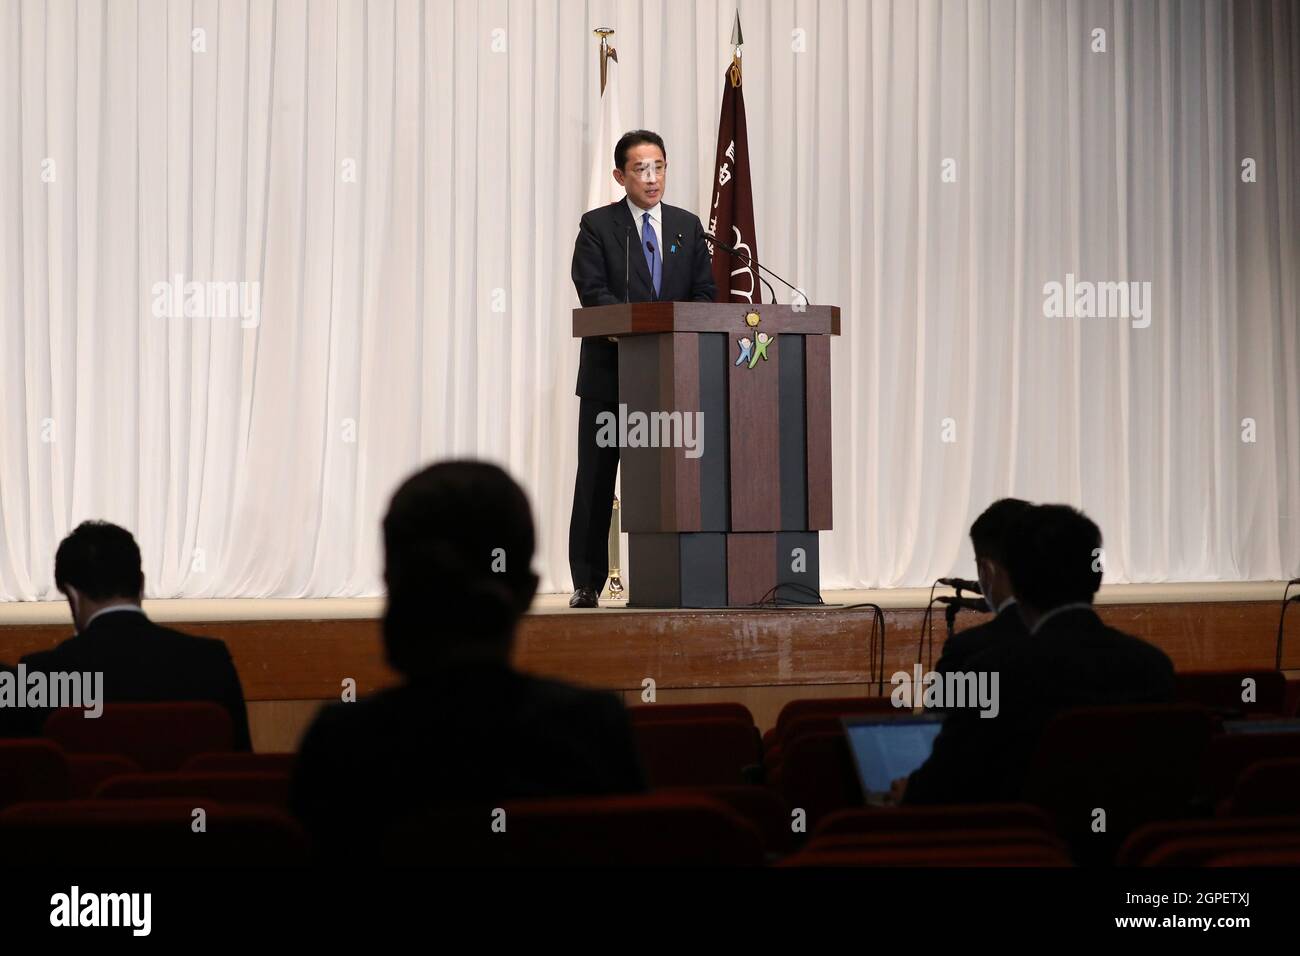 Tokyo, Japan. 29th Sep, 2021. Former Japanese Foreign Minister Fumio Kishida attends a press conference at LDP (Liberal Democratic Party) Headquarter after he is elected as Party President. Credit: SOPA Images Limited/Alamy Live News Stock Photo